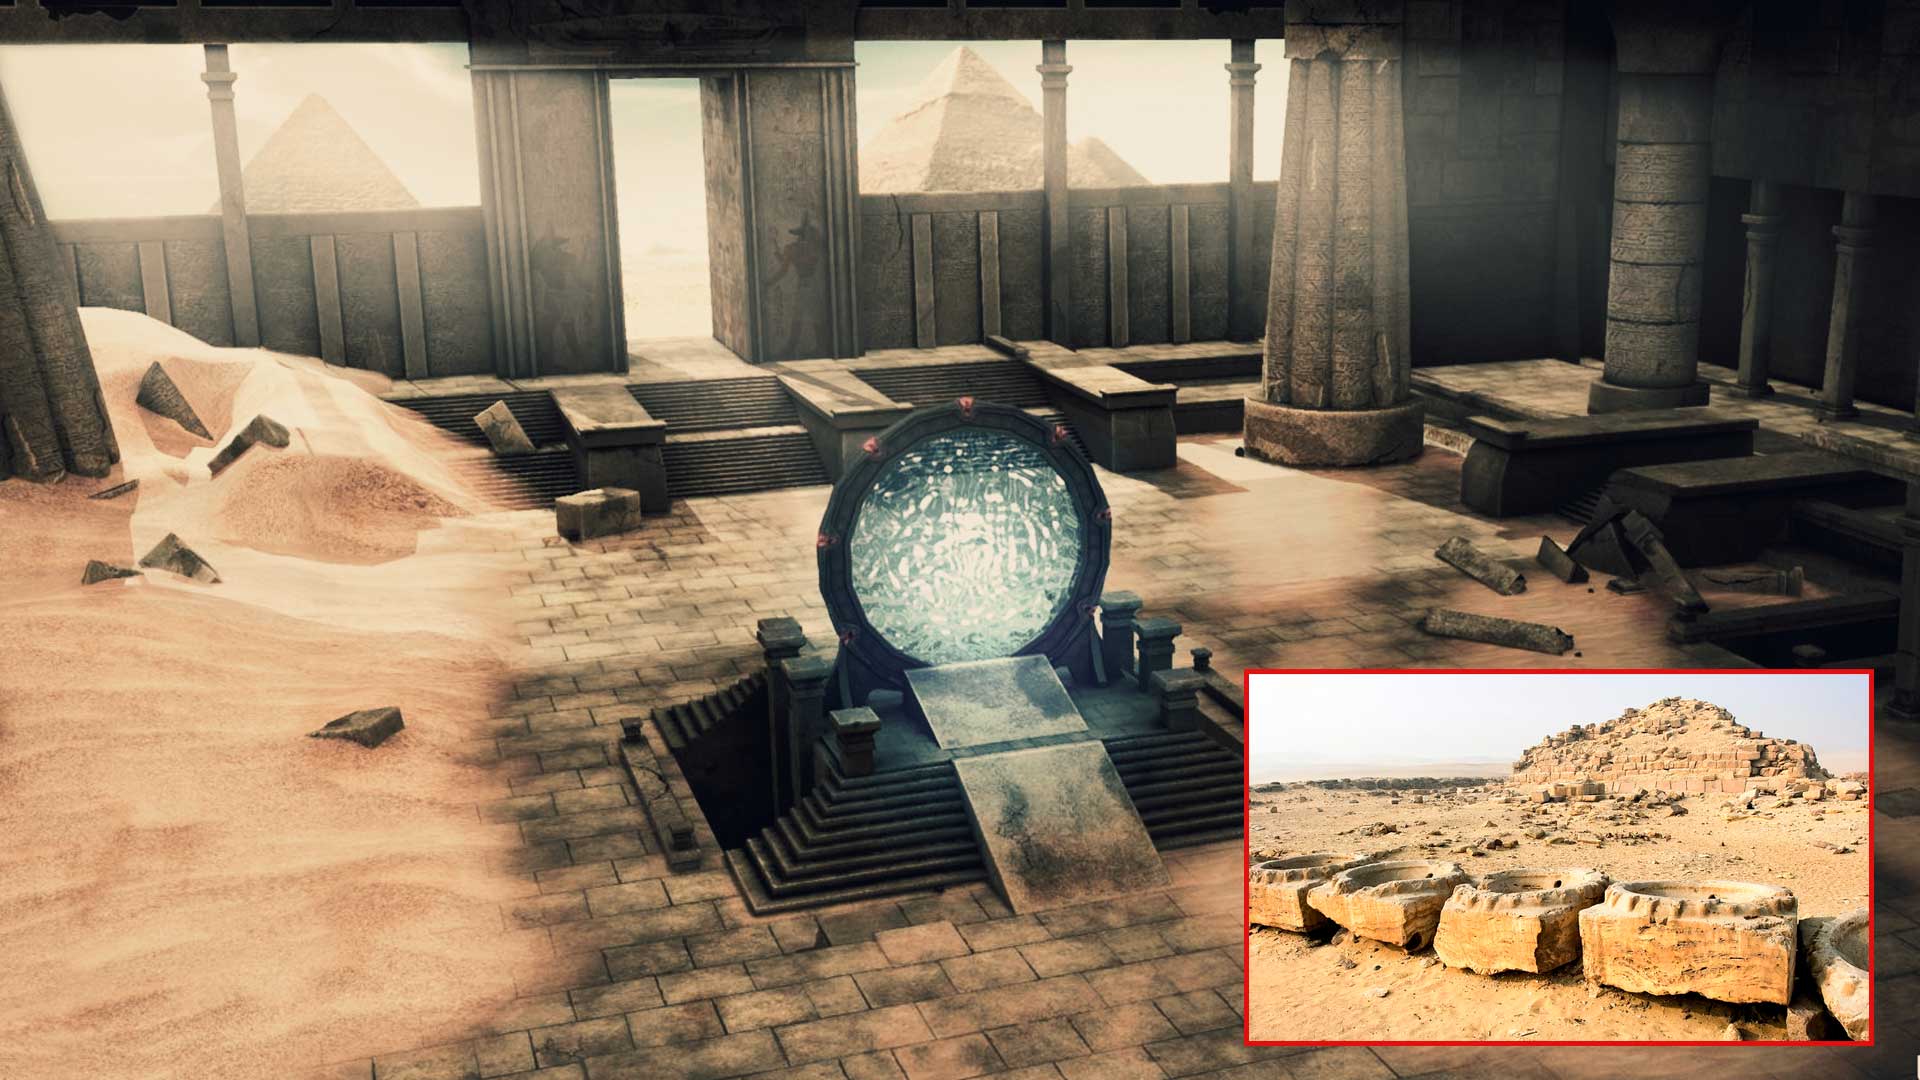 The mystery of the Solar Temple of Abu Gurab and its “Star Gate” comes to light